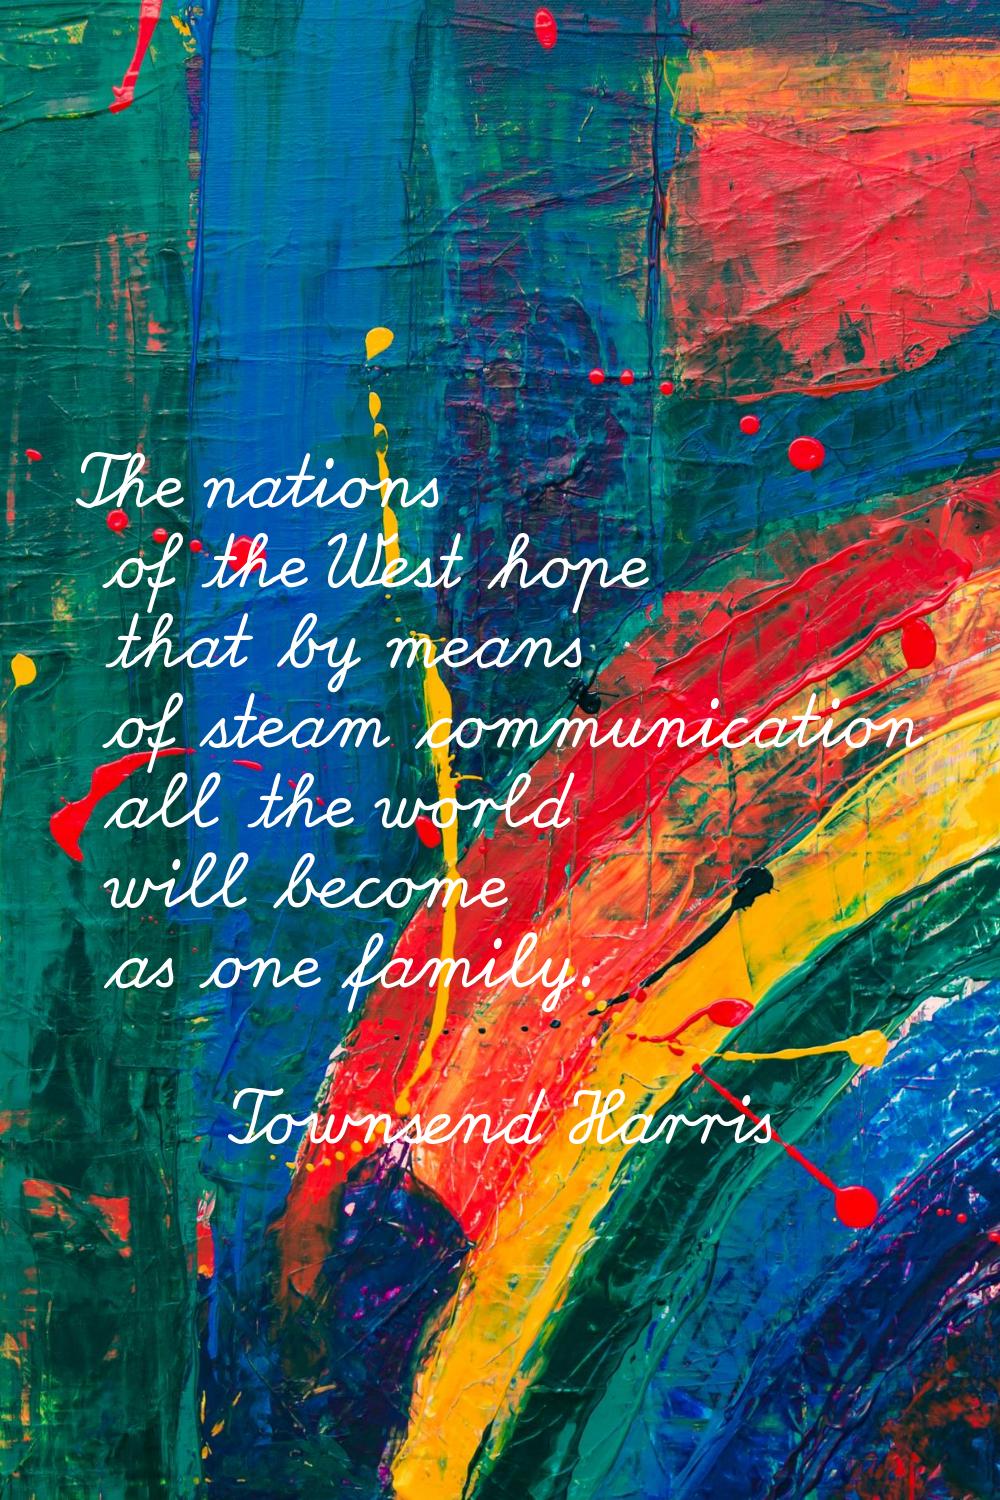 The nations of the West hope that by means of steam communication all the world will become as one 